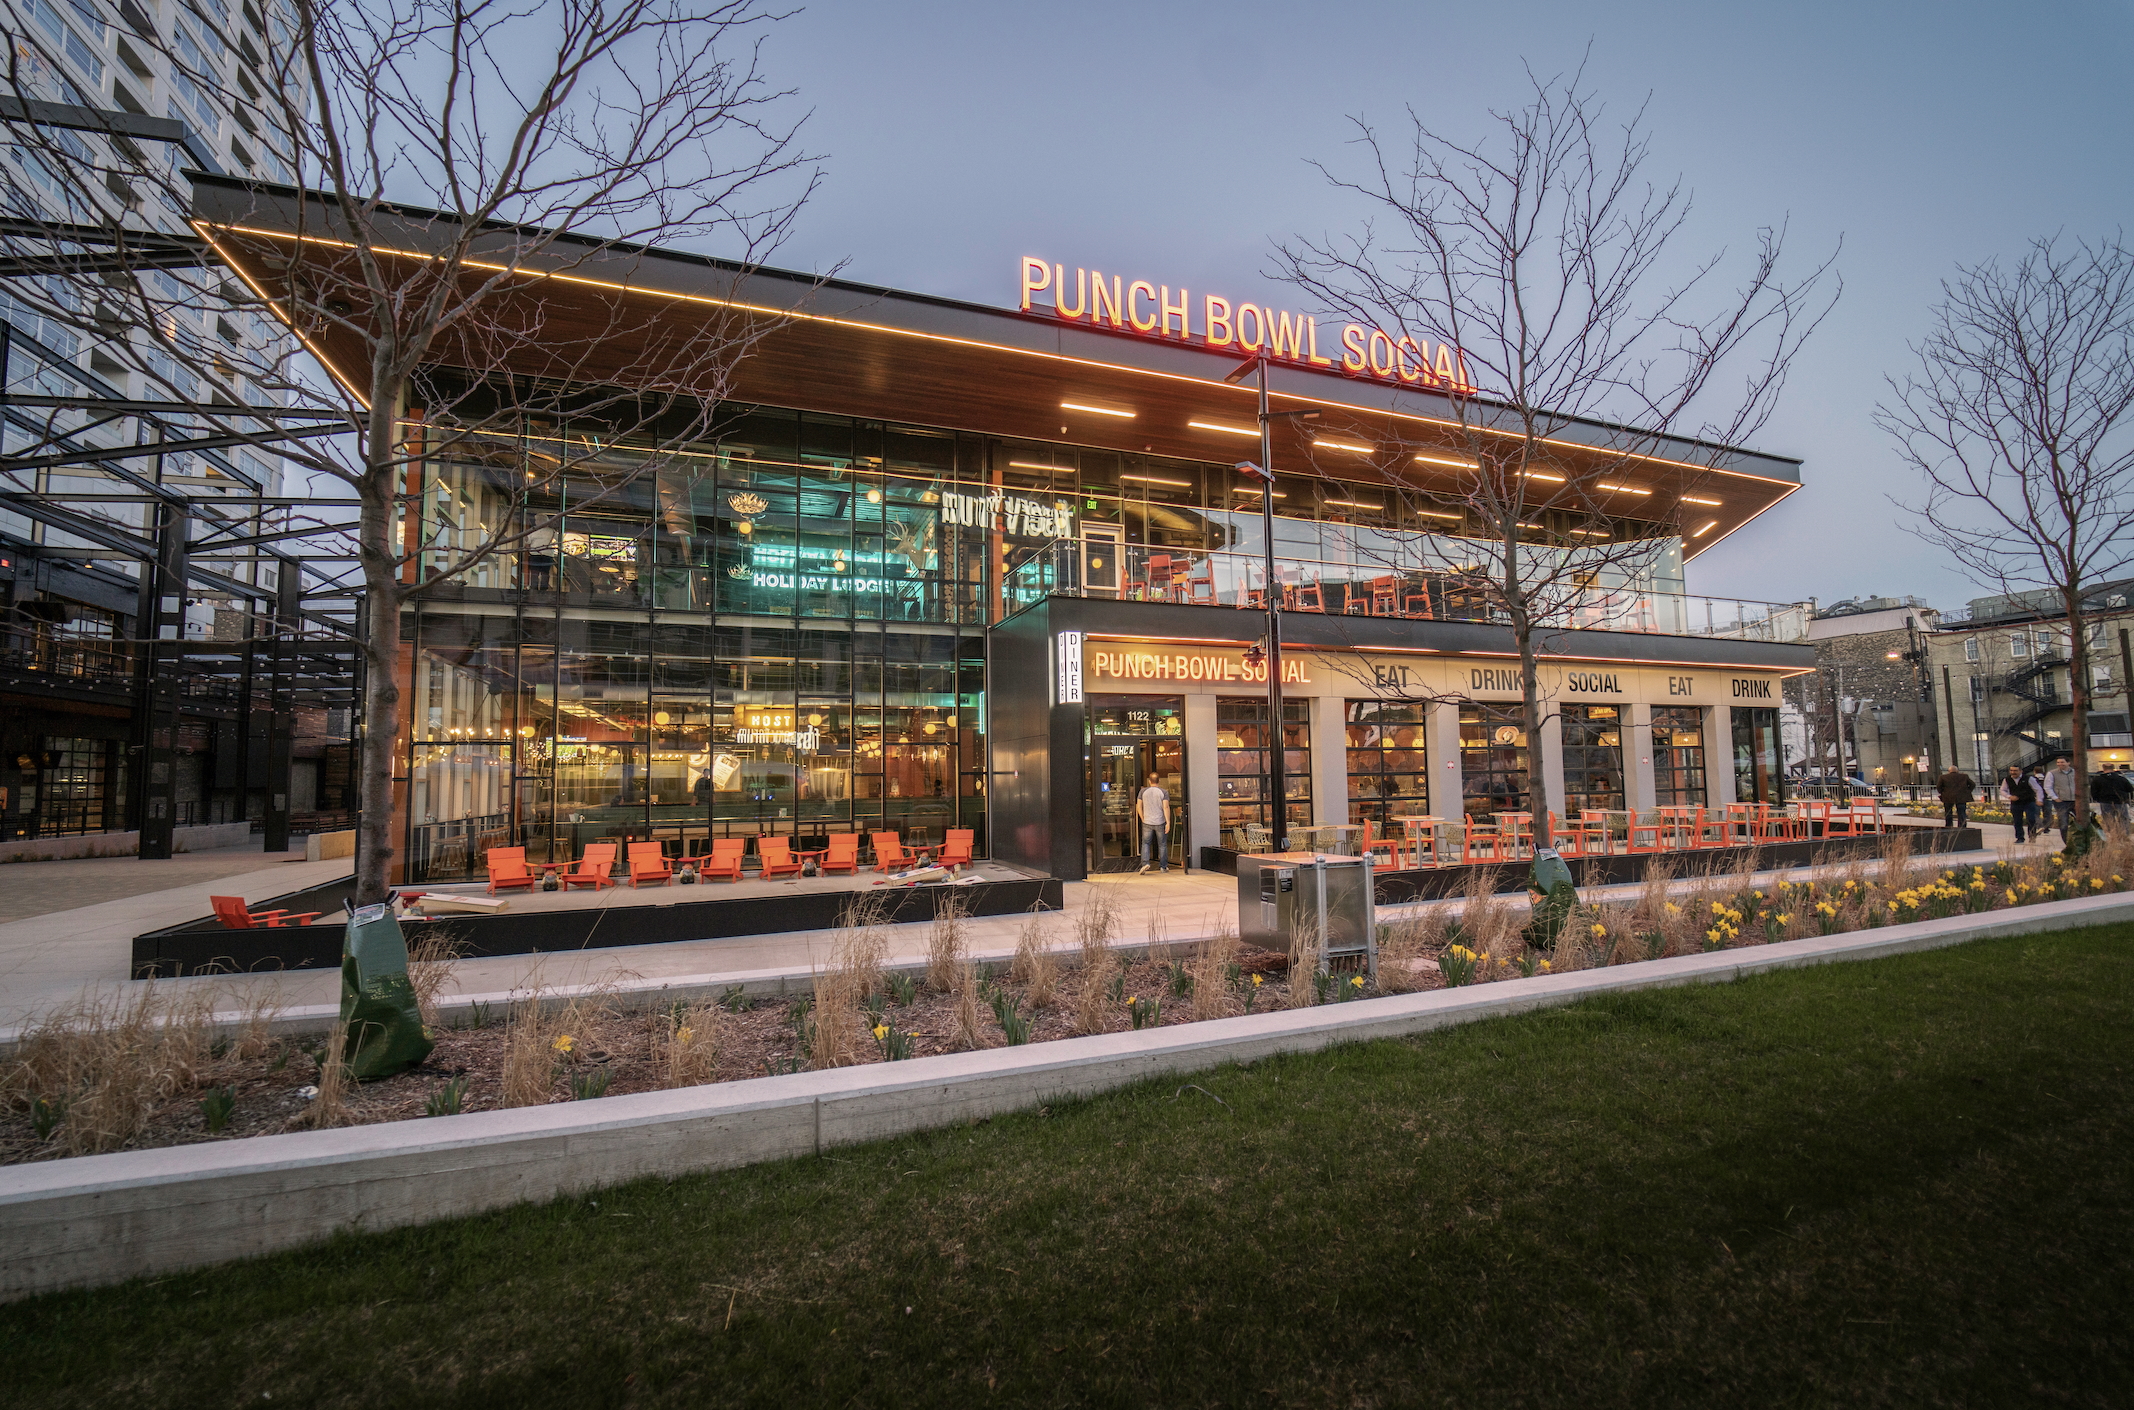 Punch Bowl Social Milwaukee Re-Opens March 16